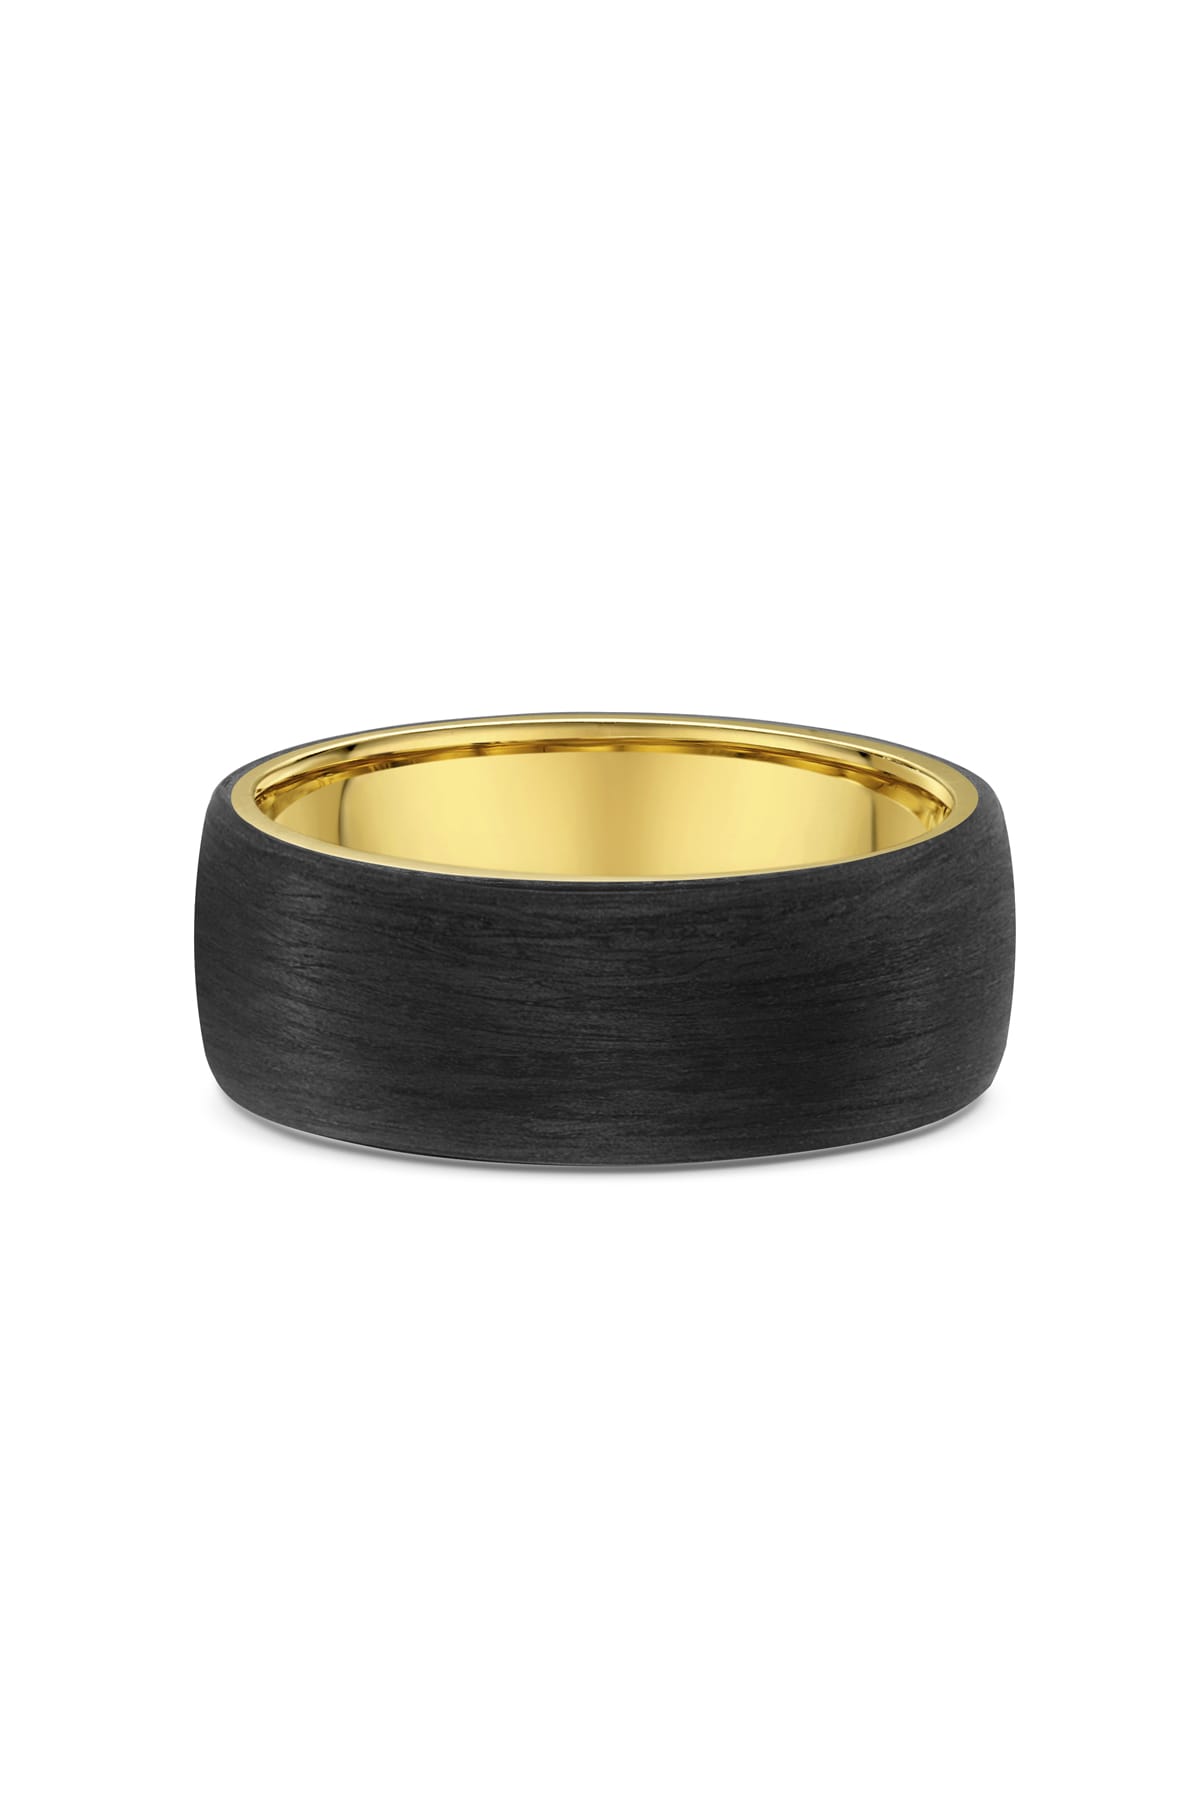 Men's Carbon Fibre And Yellow Gold Wedding Ring available at LeGassick Diamonds and Jewellery Gold Coast, Australia.